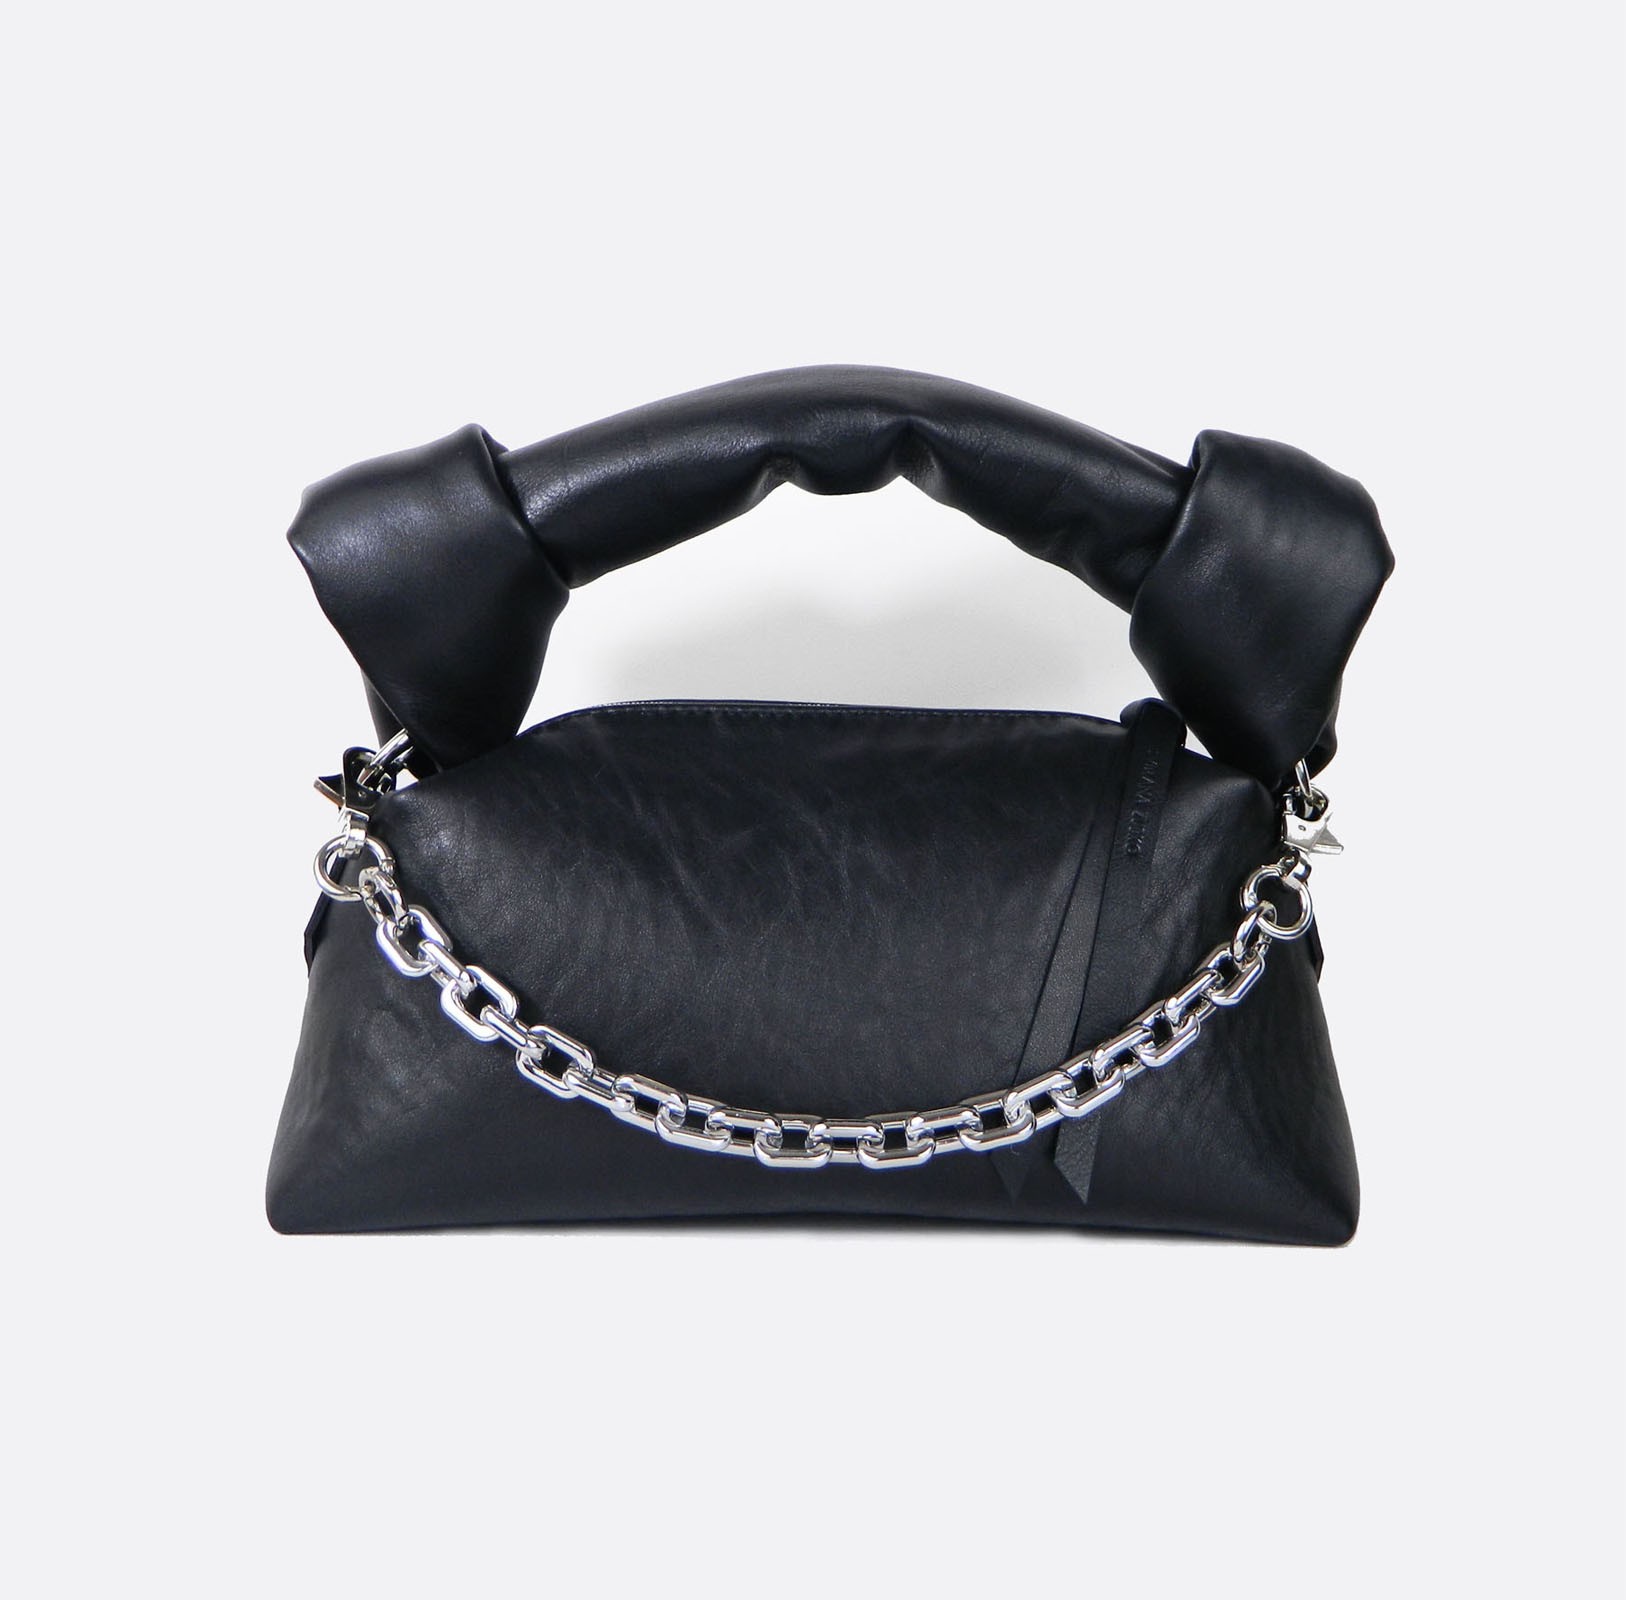 Leather bag    " Connection "